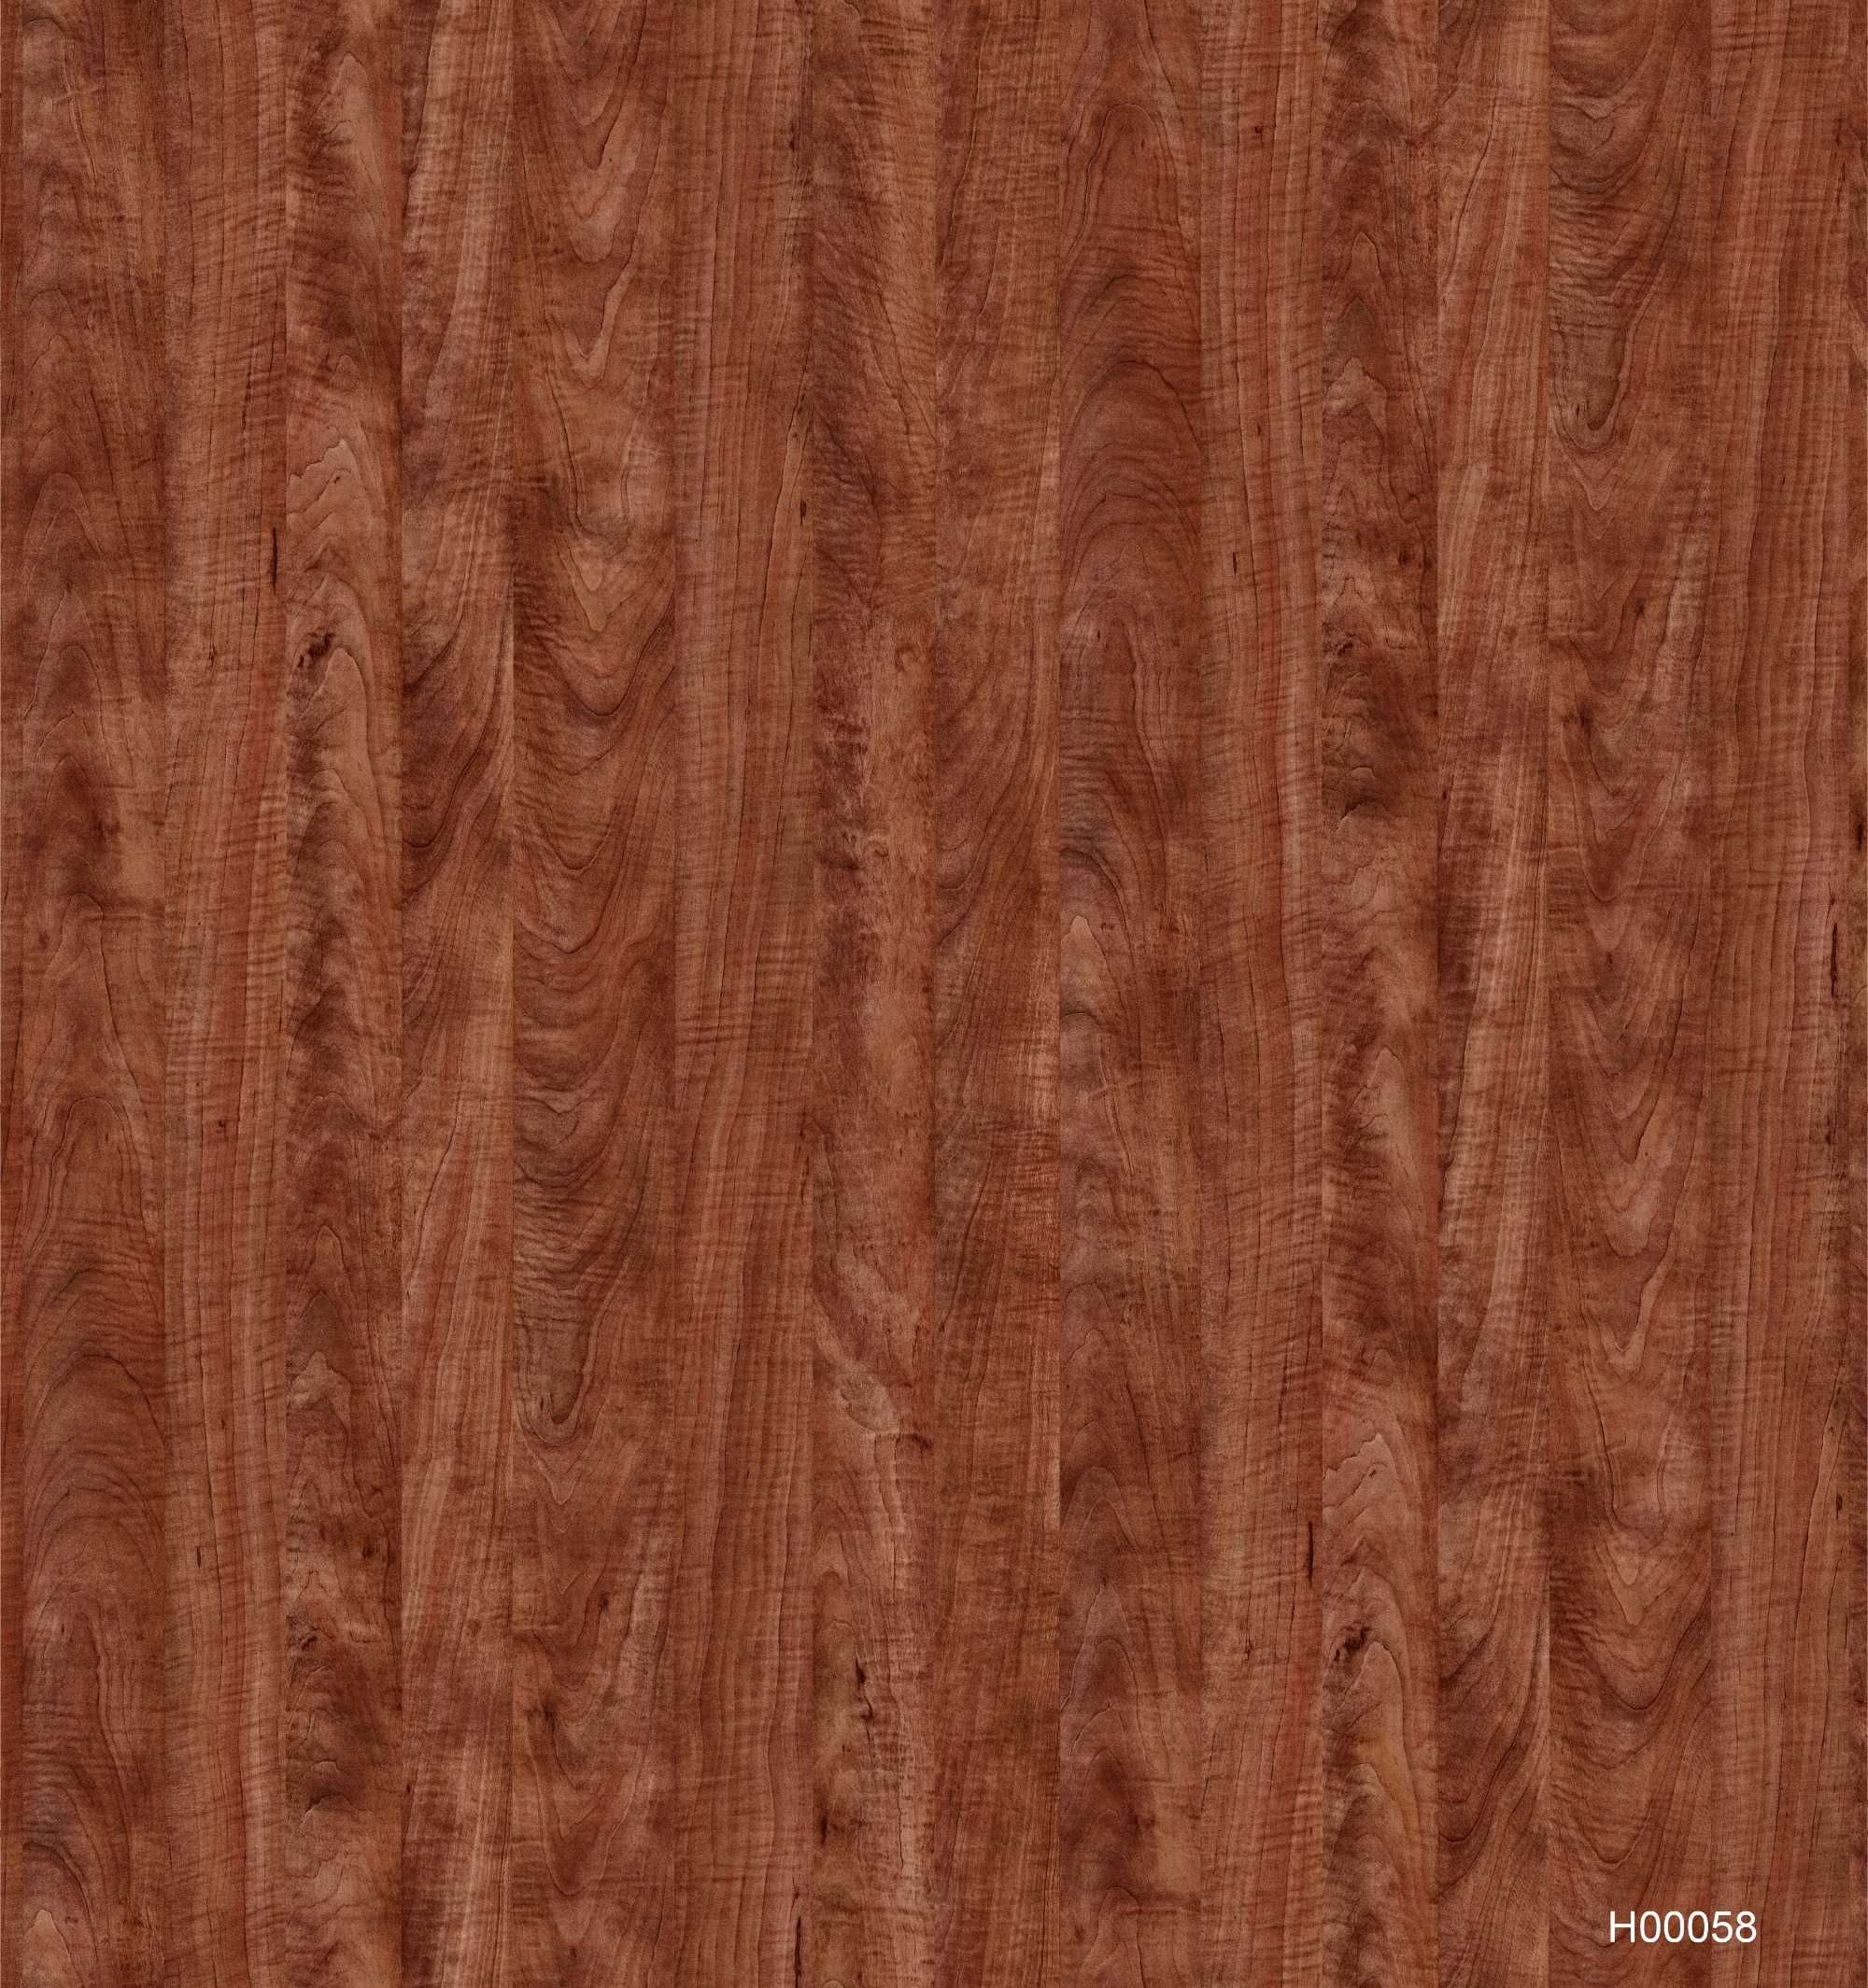 H00058 Melamine paper with wood grain